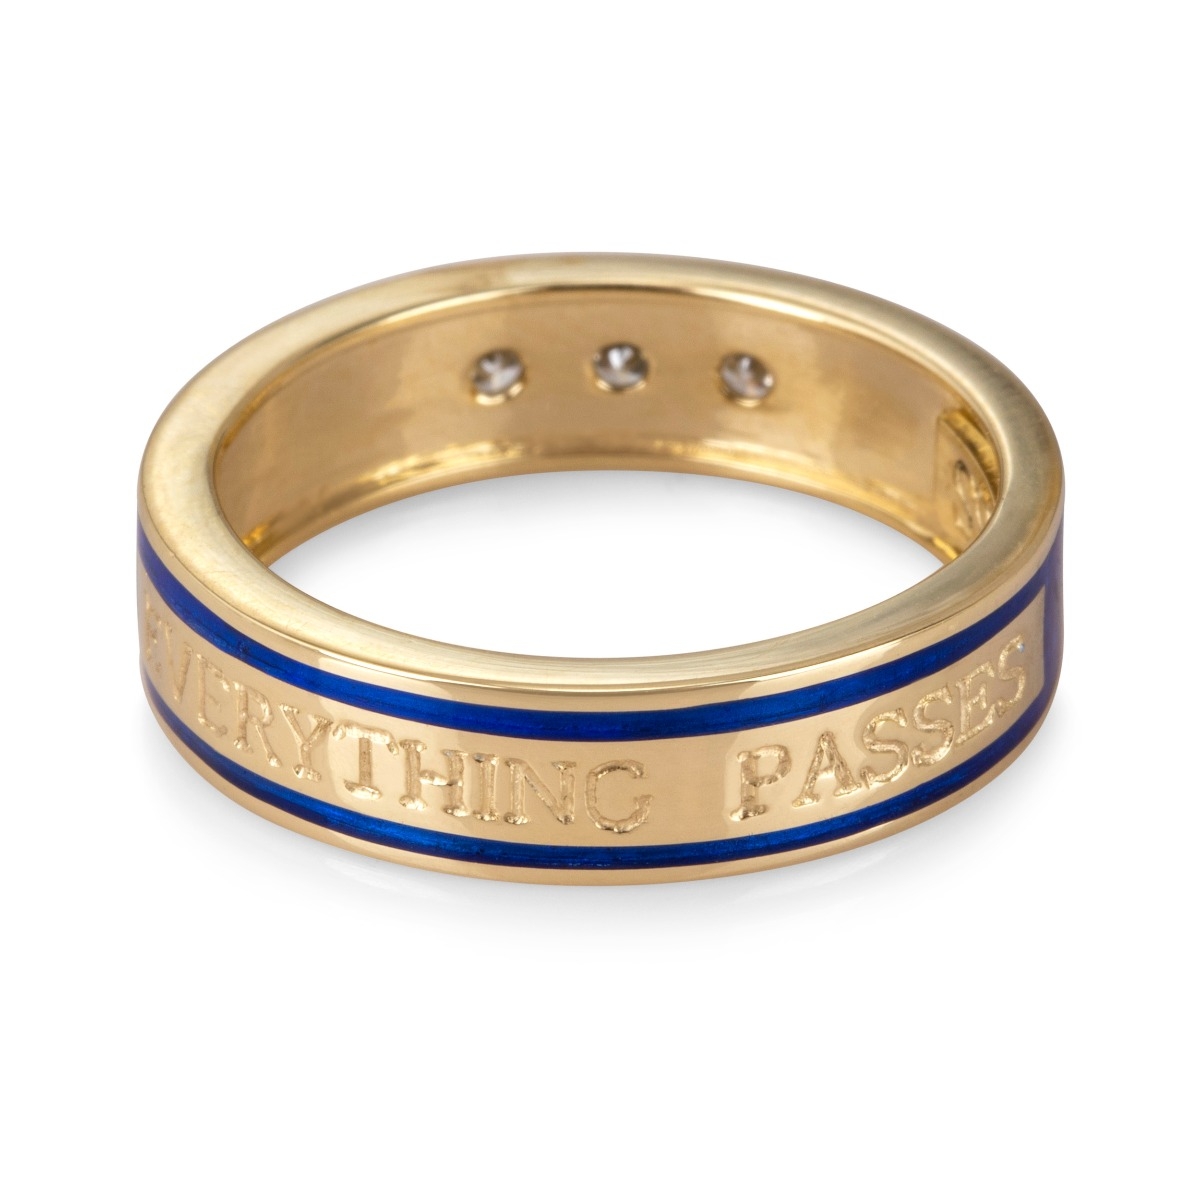 14K Yellow Gold and Blue Enamel "This Too Shall Pass" Men's Ring With Three White Diamonds (English) - 1